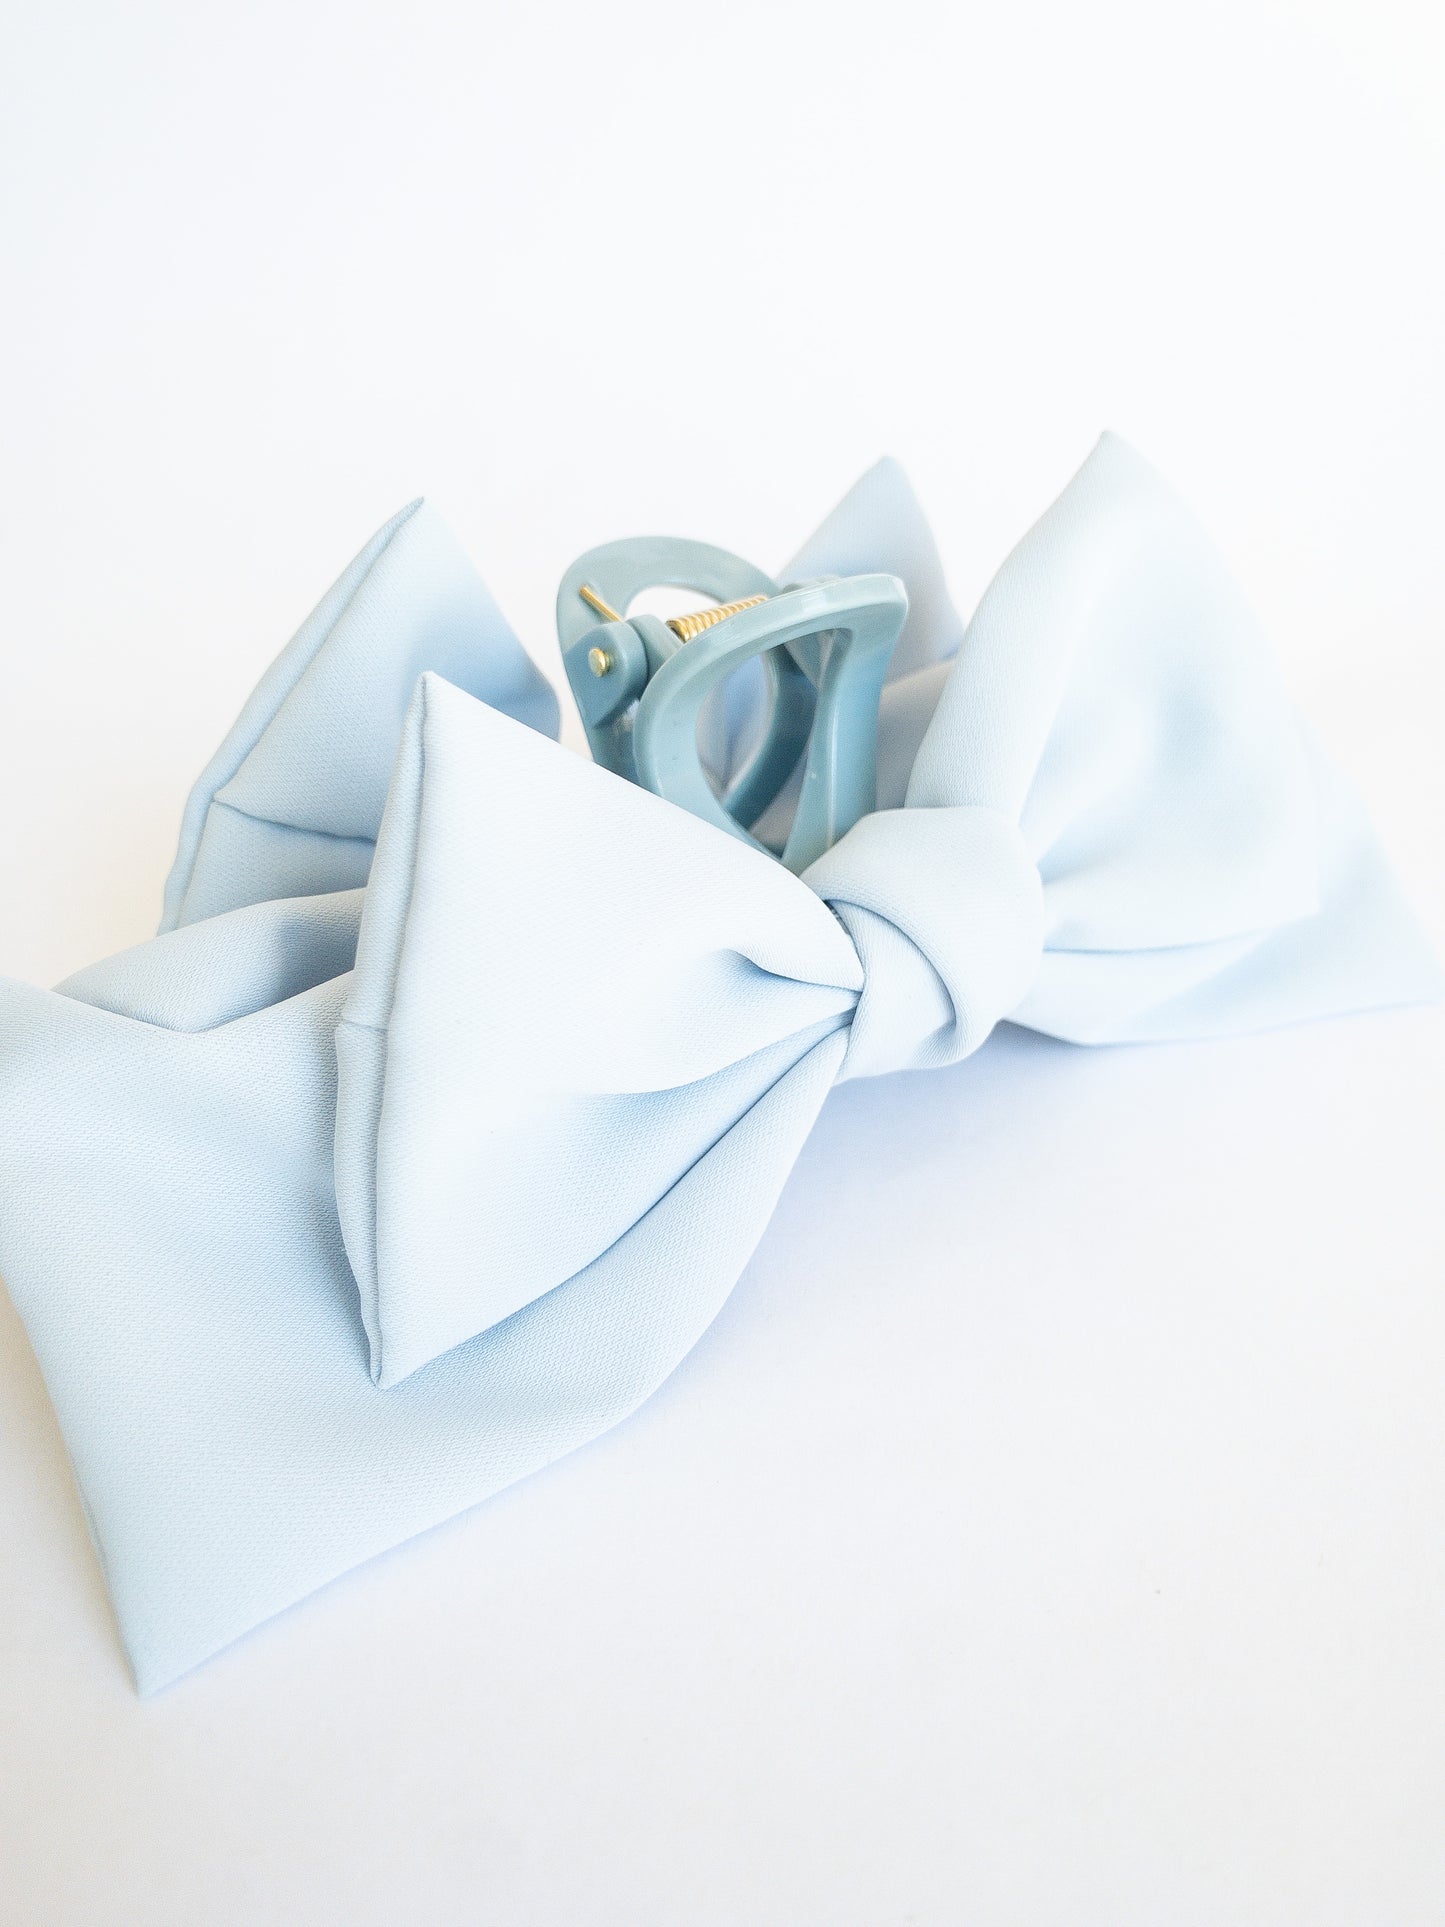 Put a bow on you, you're a gift!  This jumbo bow hair claw in a soft sky blue is for those girly days. When you want to frame your face with little wispy bangs and secure it with a pretty bow.